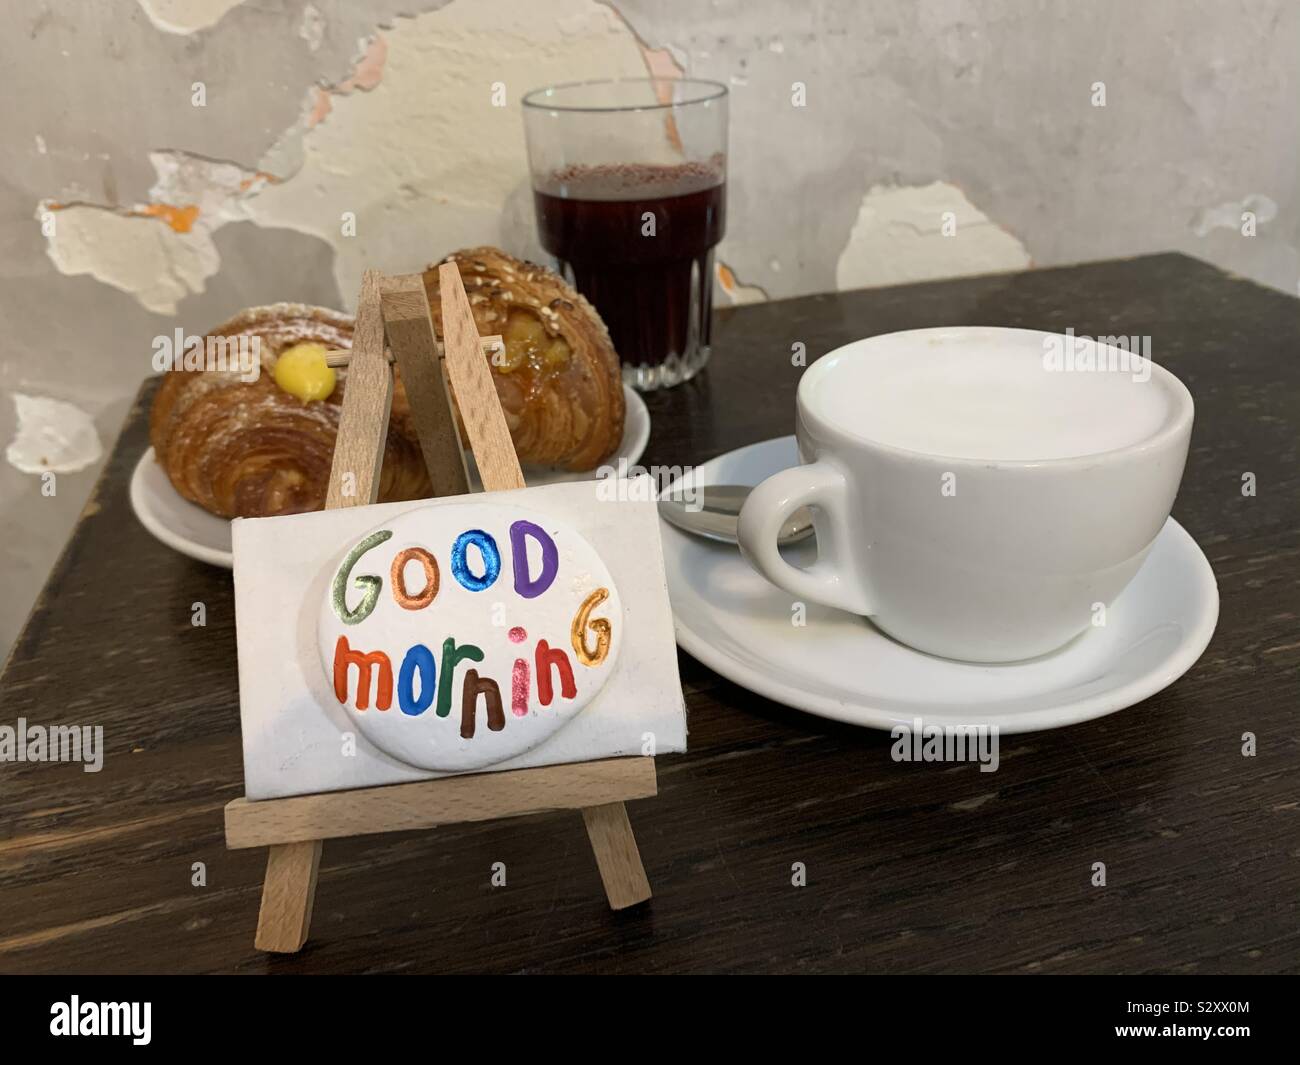 Good morning message with a sweet breakfast Stock Photo - Alamy